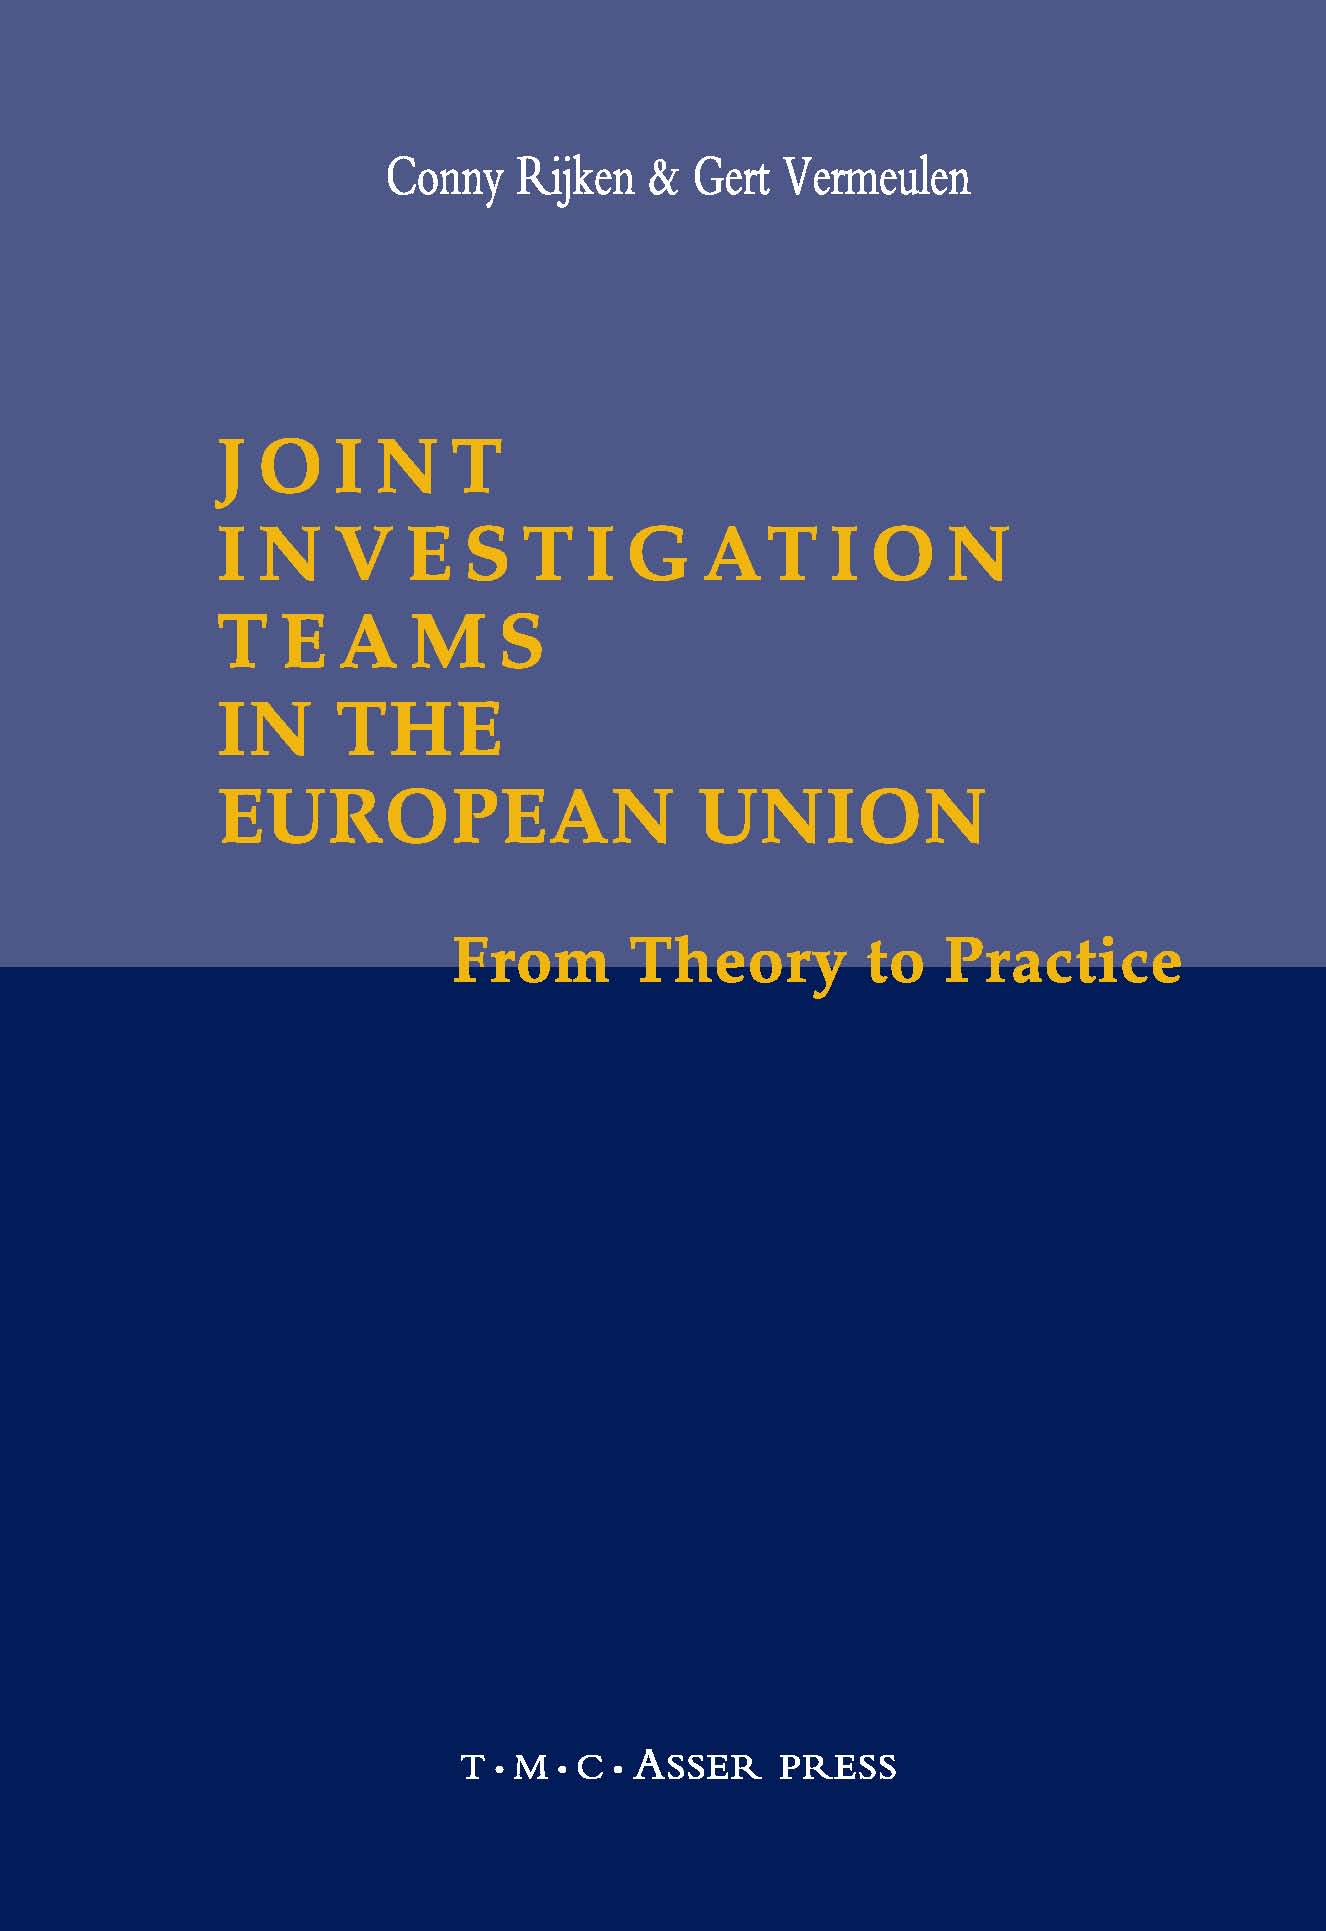 Joint Investigation Teams in the European Union - From Theory to Practice